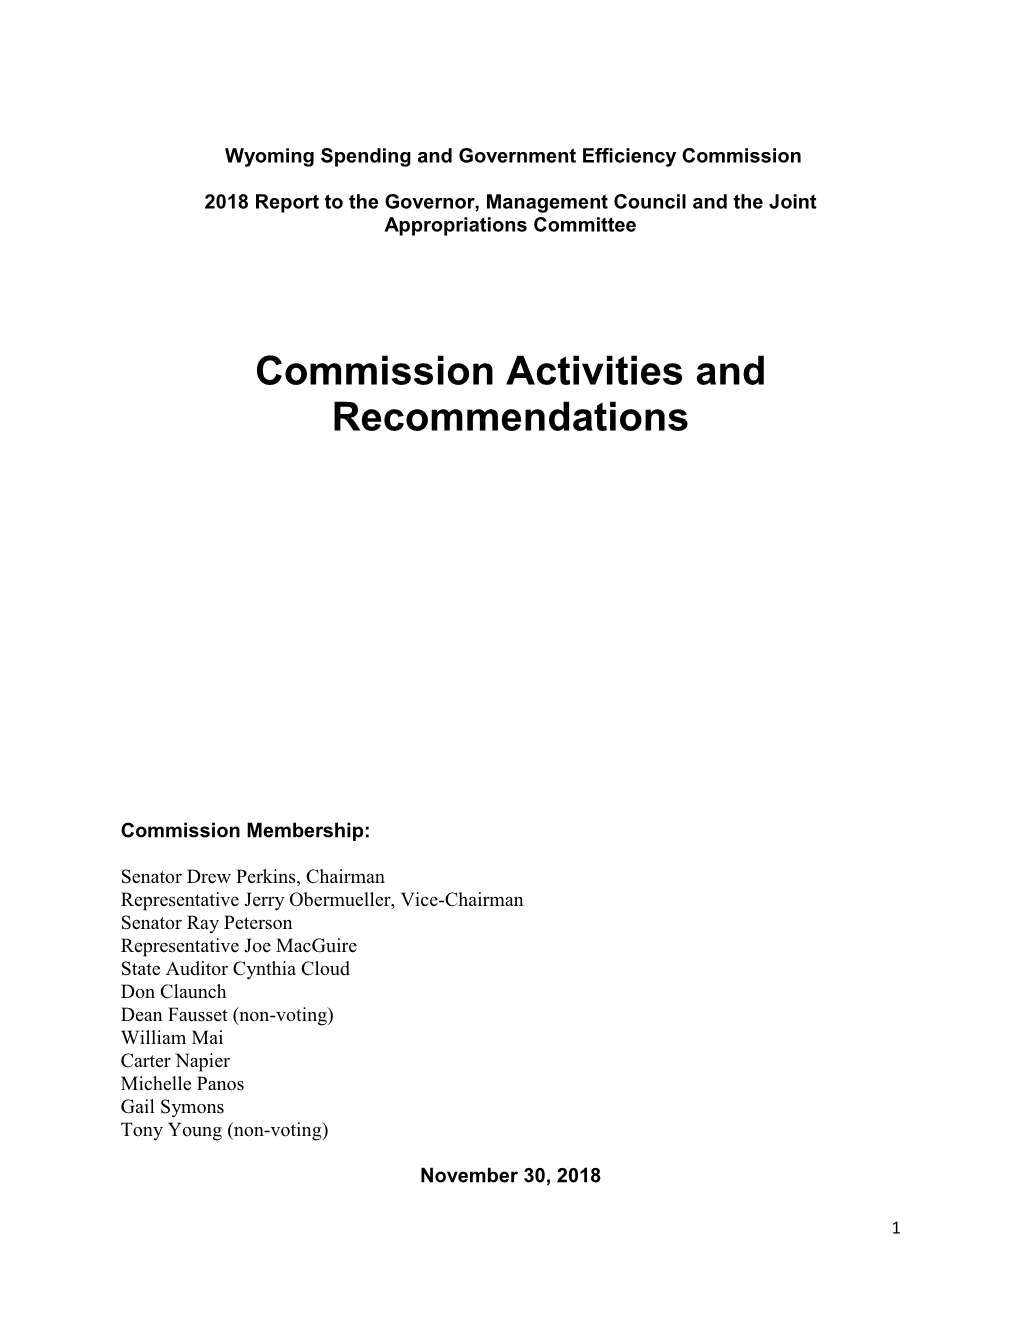 Commission Activities and Recommendations